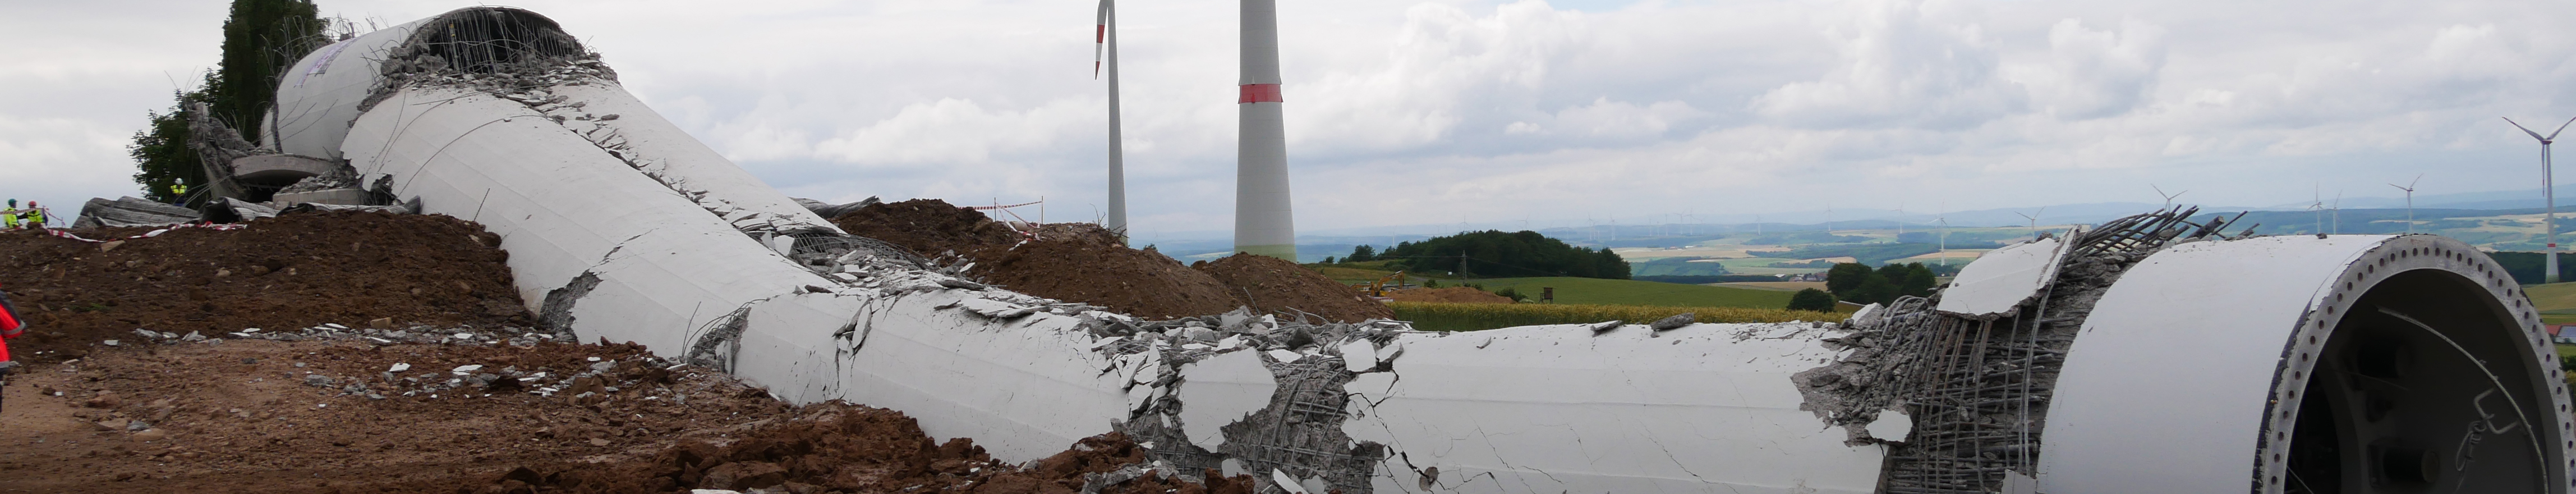 How do you bring down a wind turbine in one fell swoop?